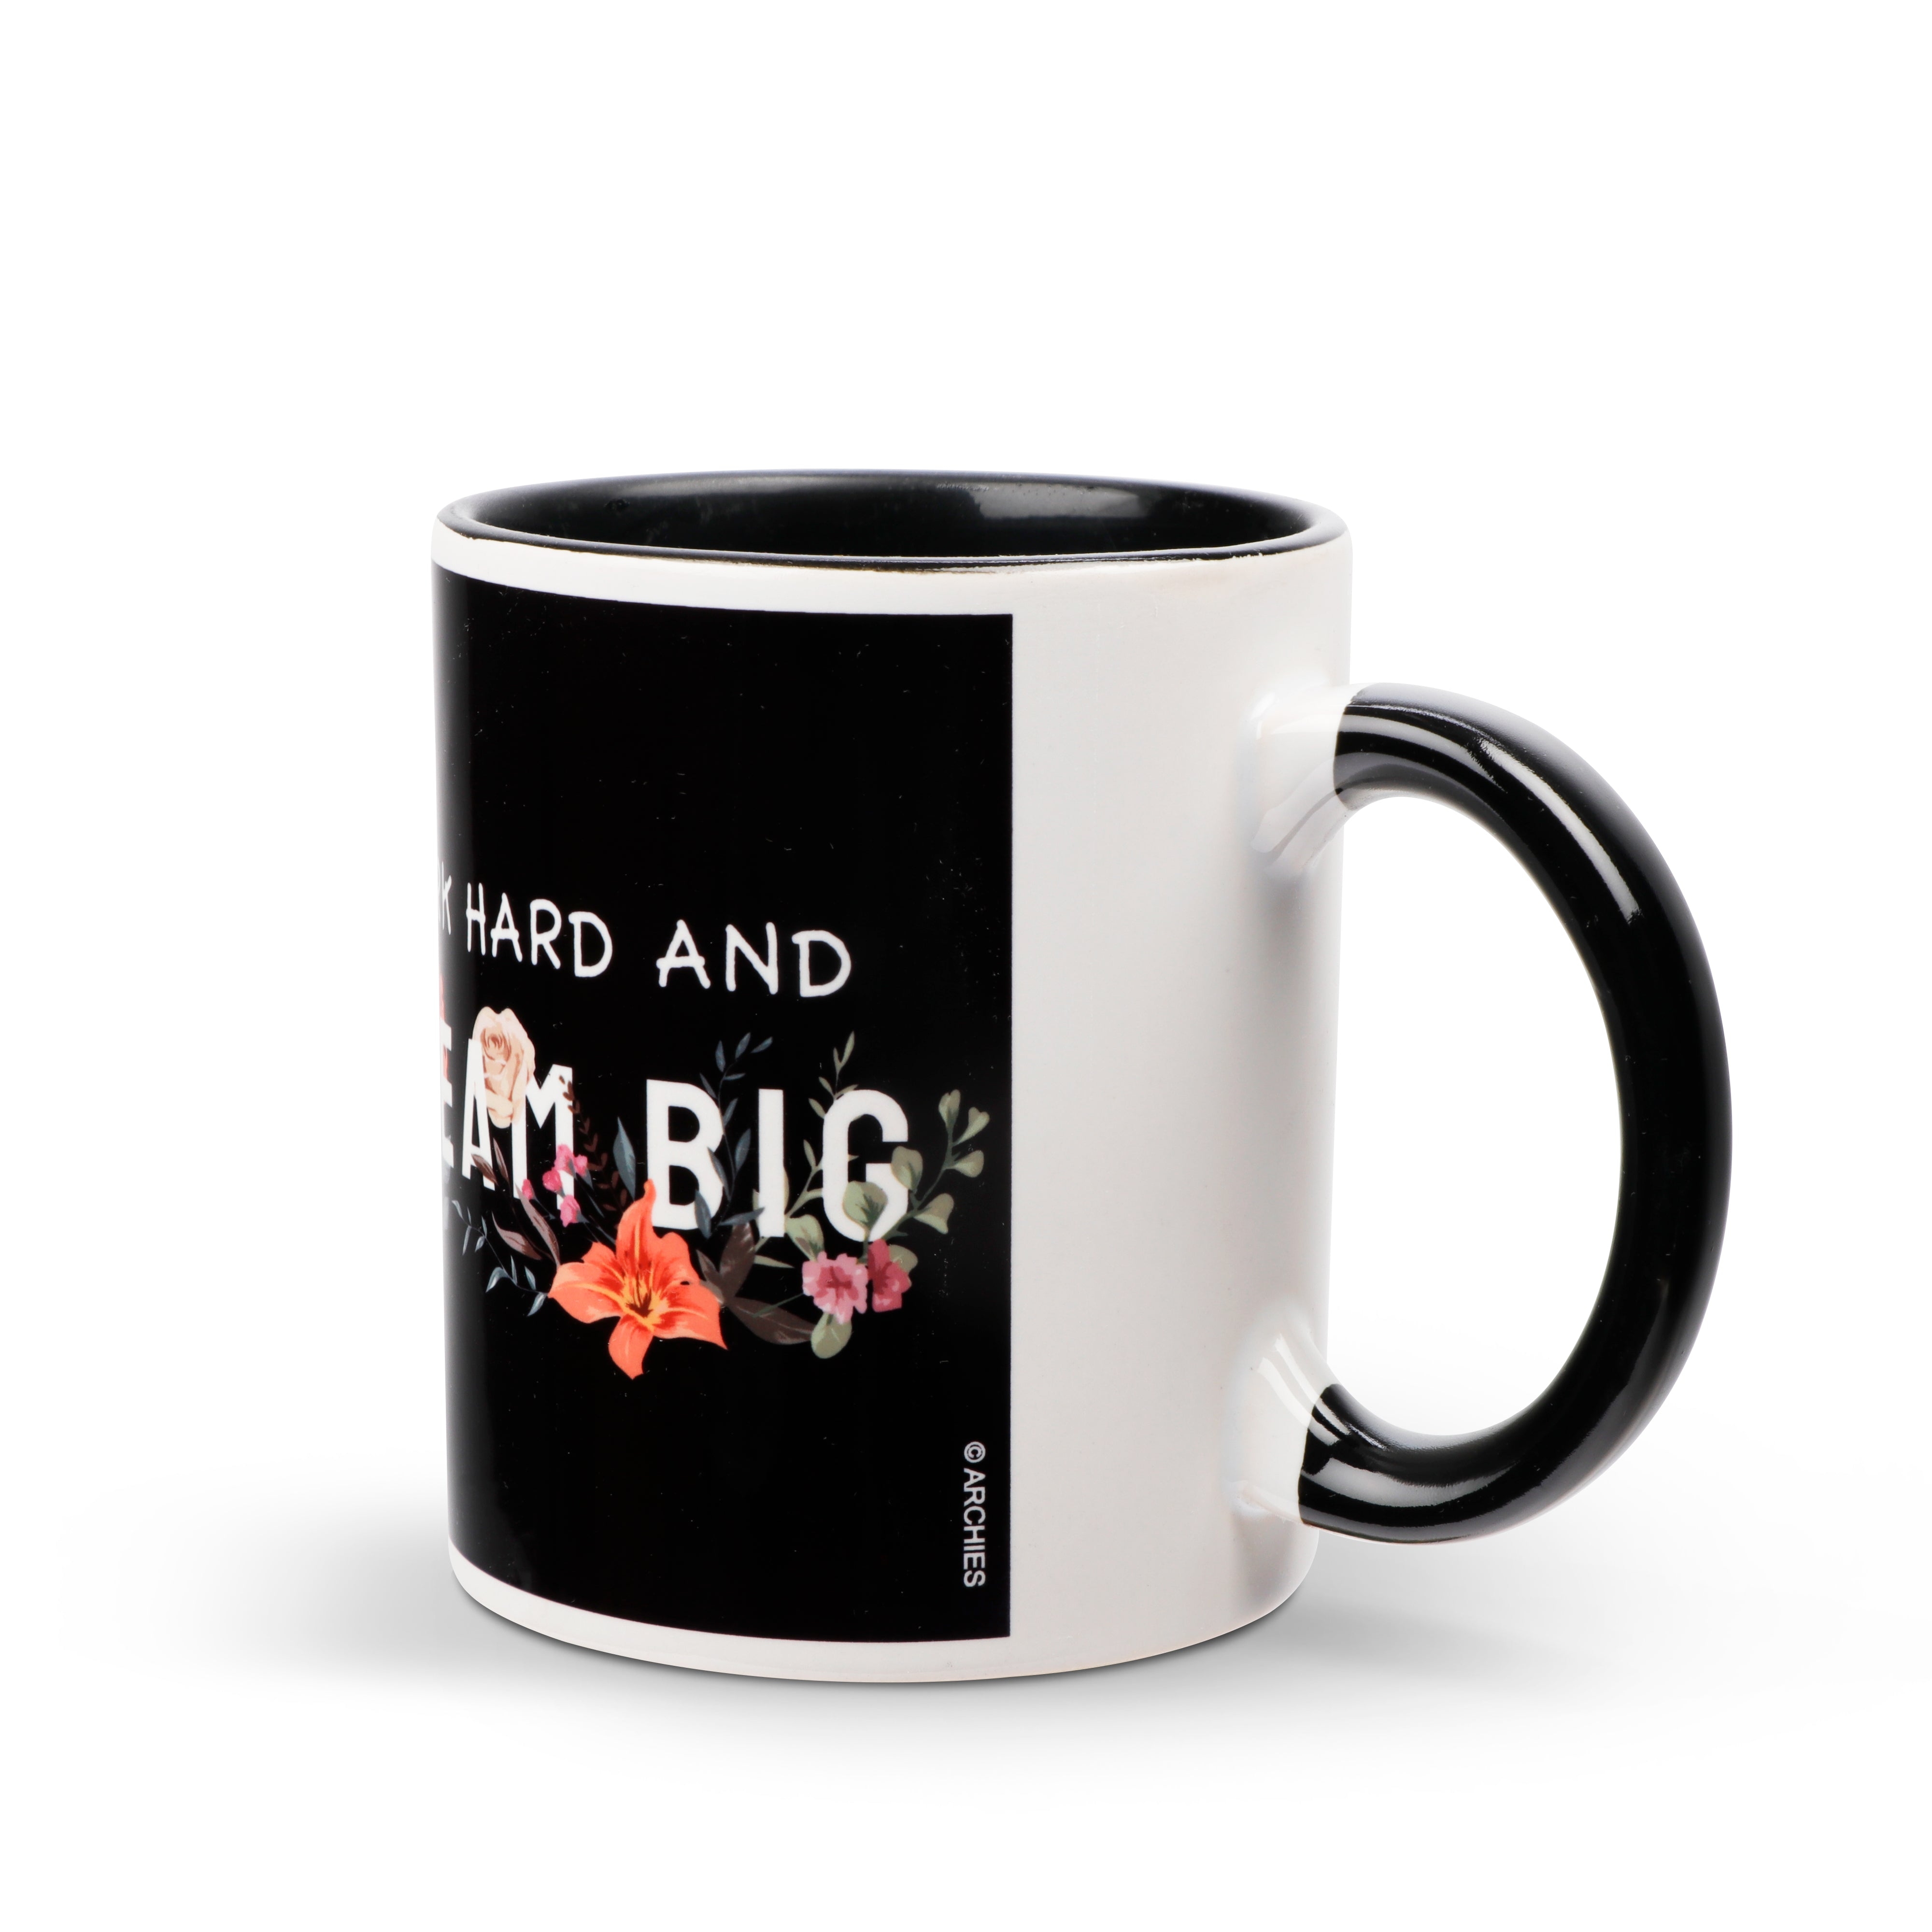 Archies | Archies KEEP SAKE Combo Gift with Ceramic Mug and Elevated Initial Quotatio- DREAM BIG 2